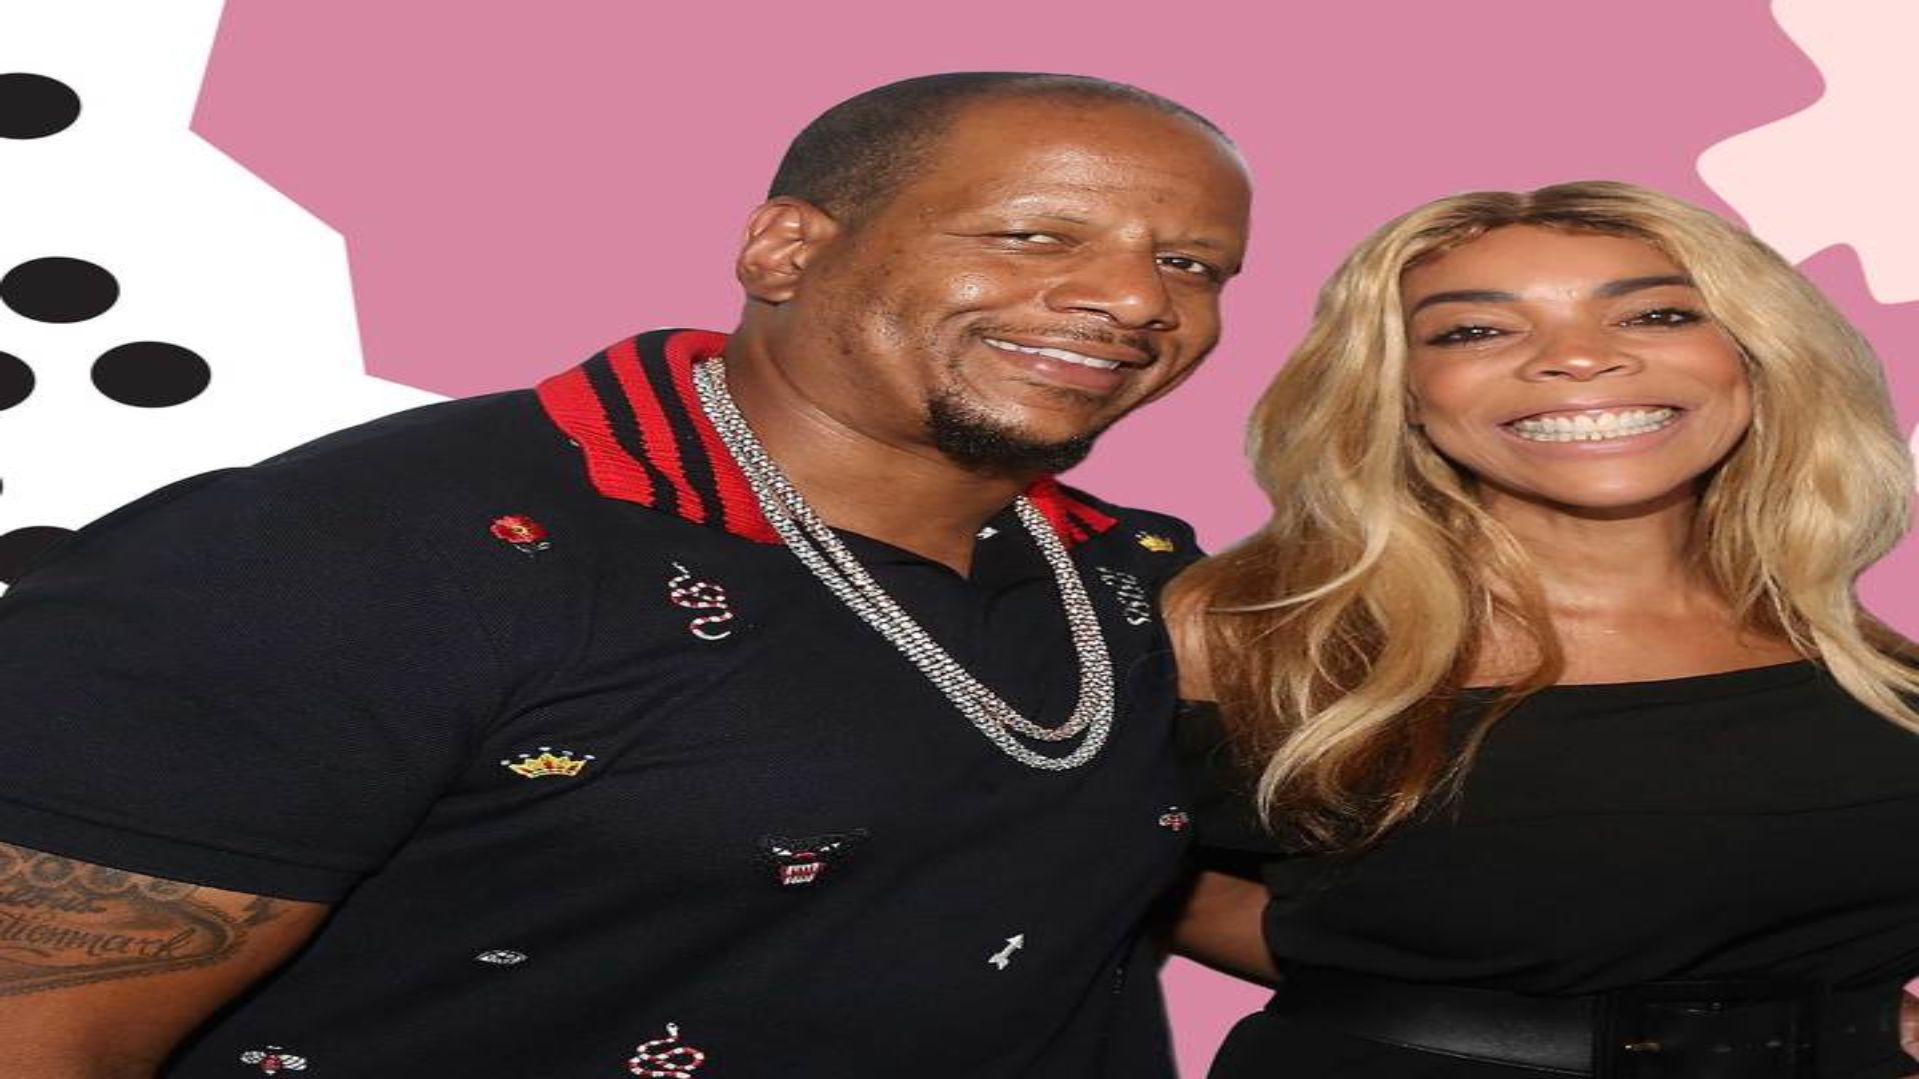 Wendy Williams Defends Her Marriage Post Infidelity Rumors: 'I’m Still Very Much In Love With My Husband'